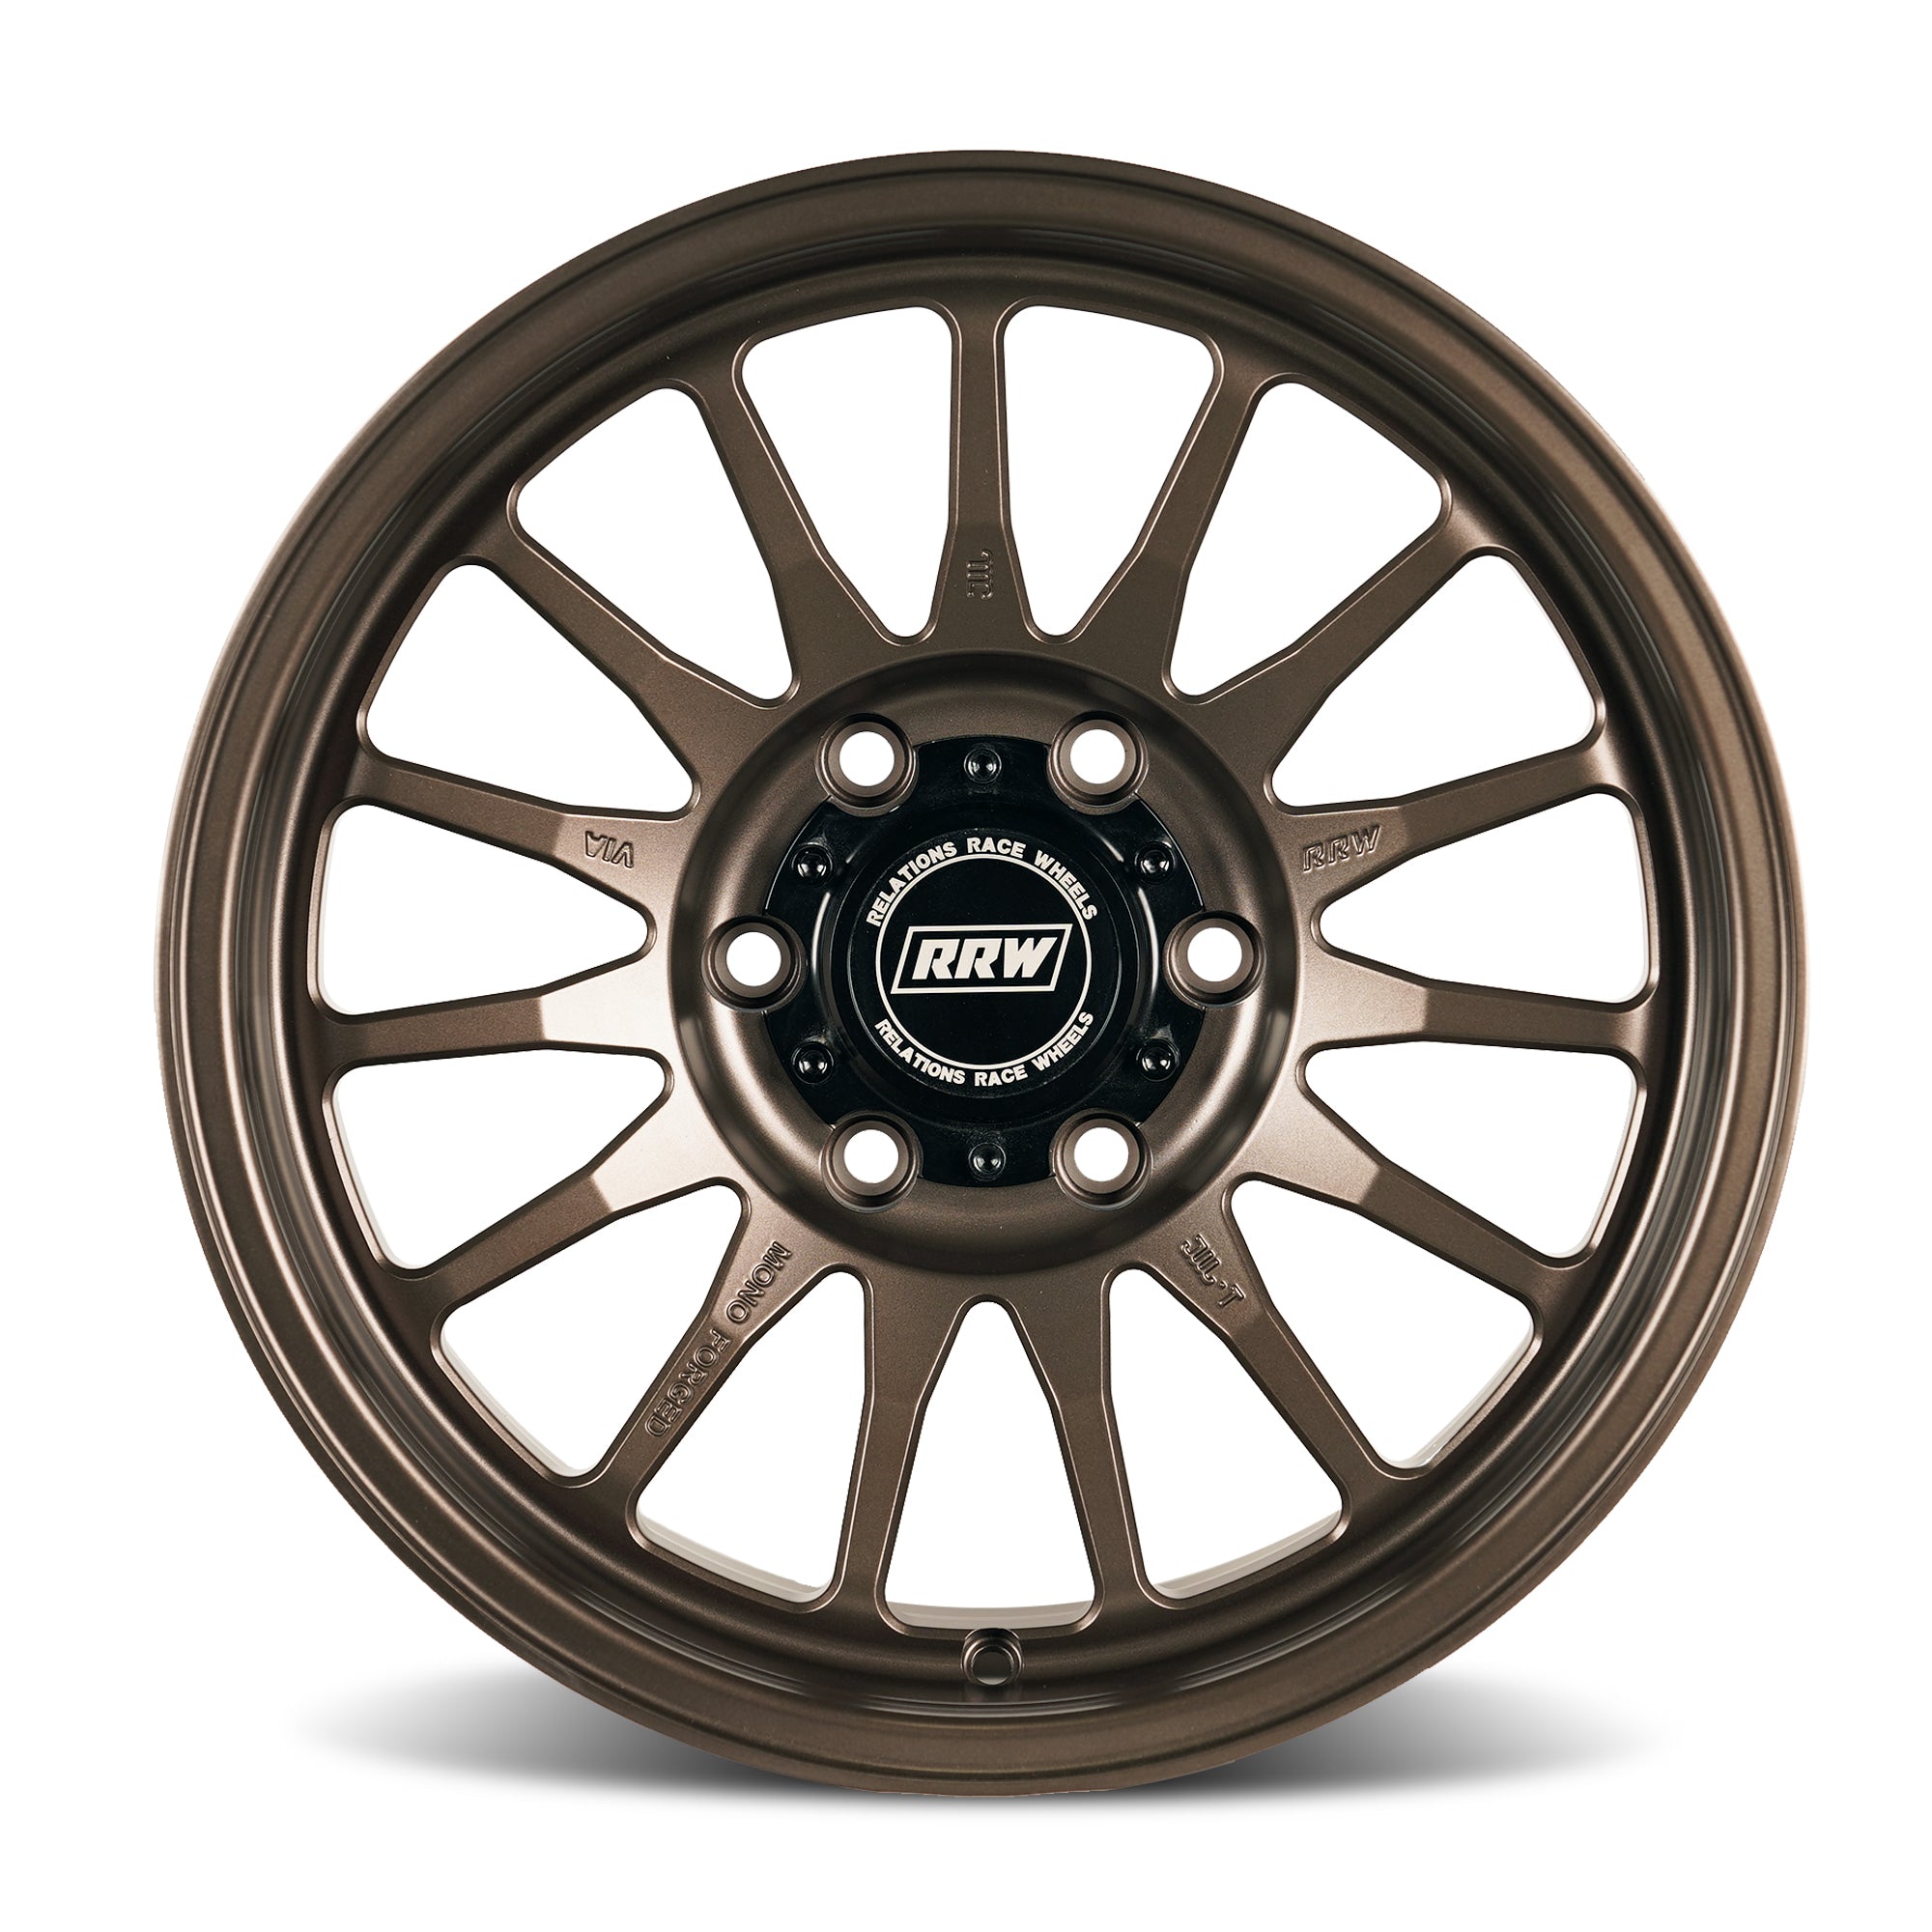 Pre-Order: RS7-S 17x8.5 and 18x8.5 MonoForged Wheel